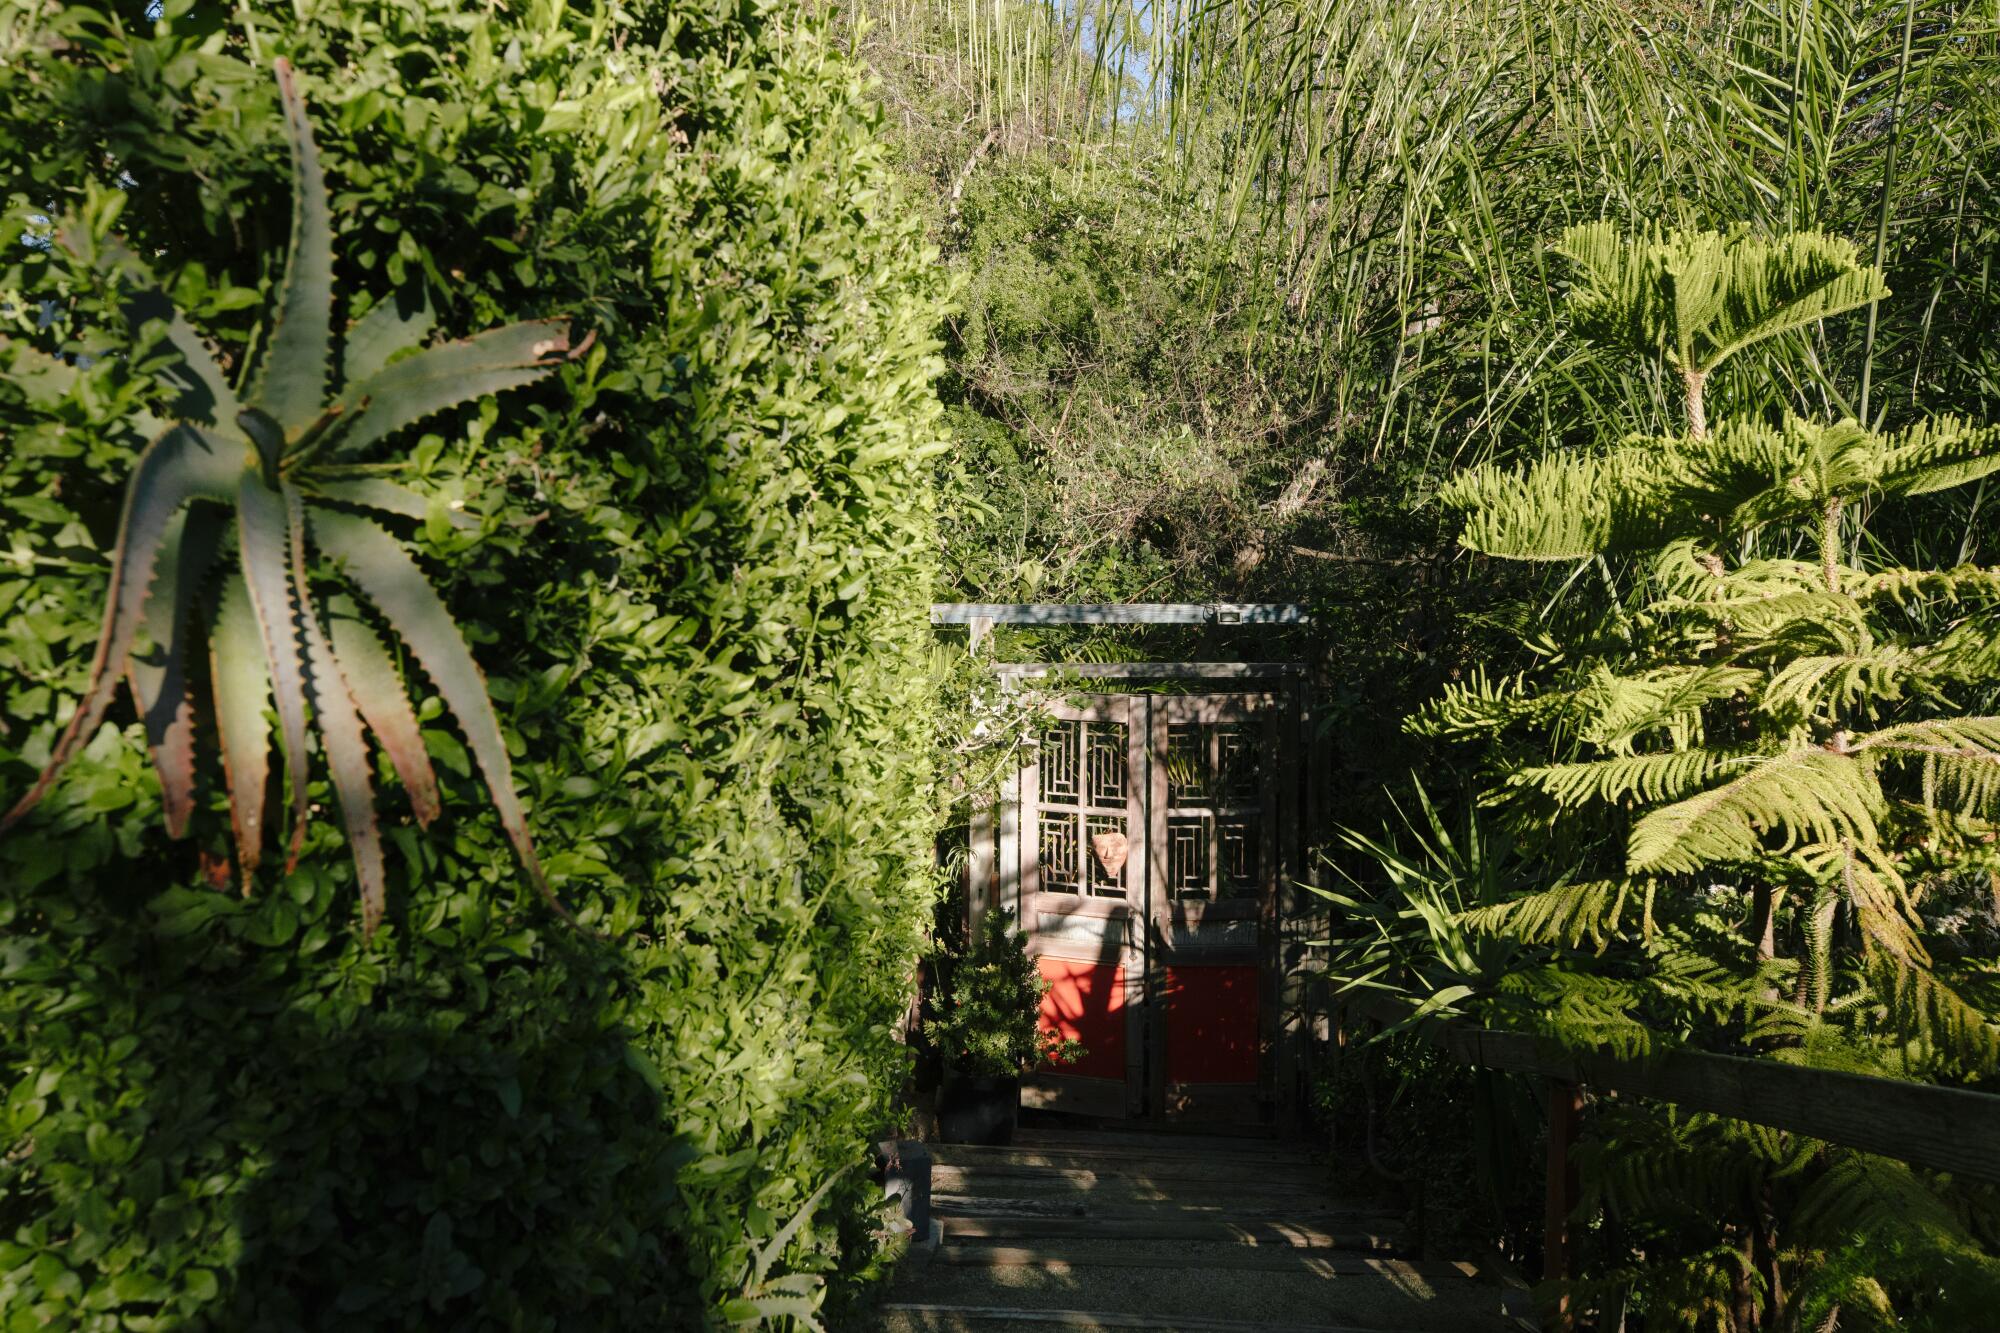 A walkway leads to a gate at the house Rosenthal built.